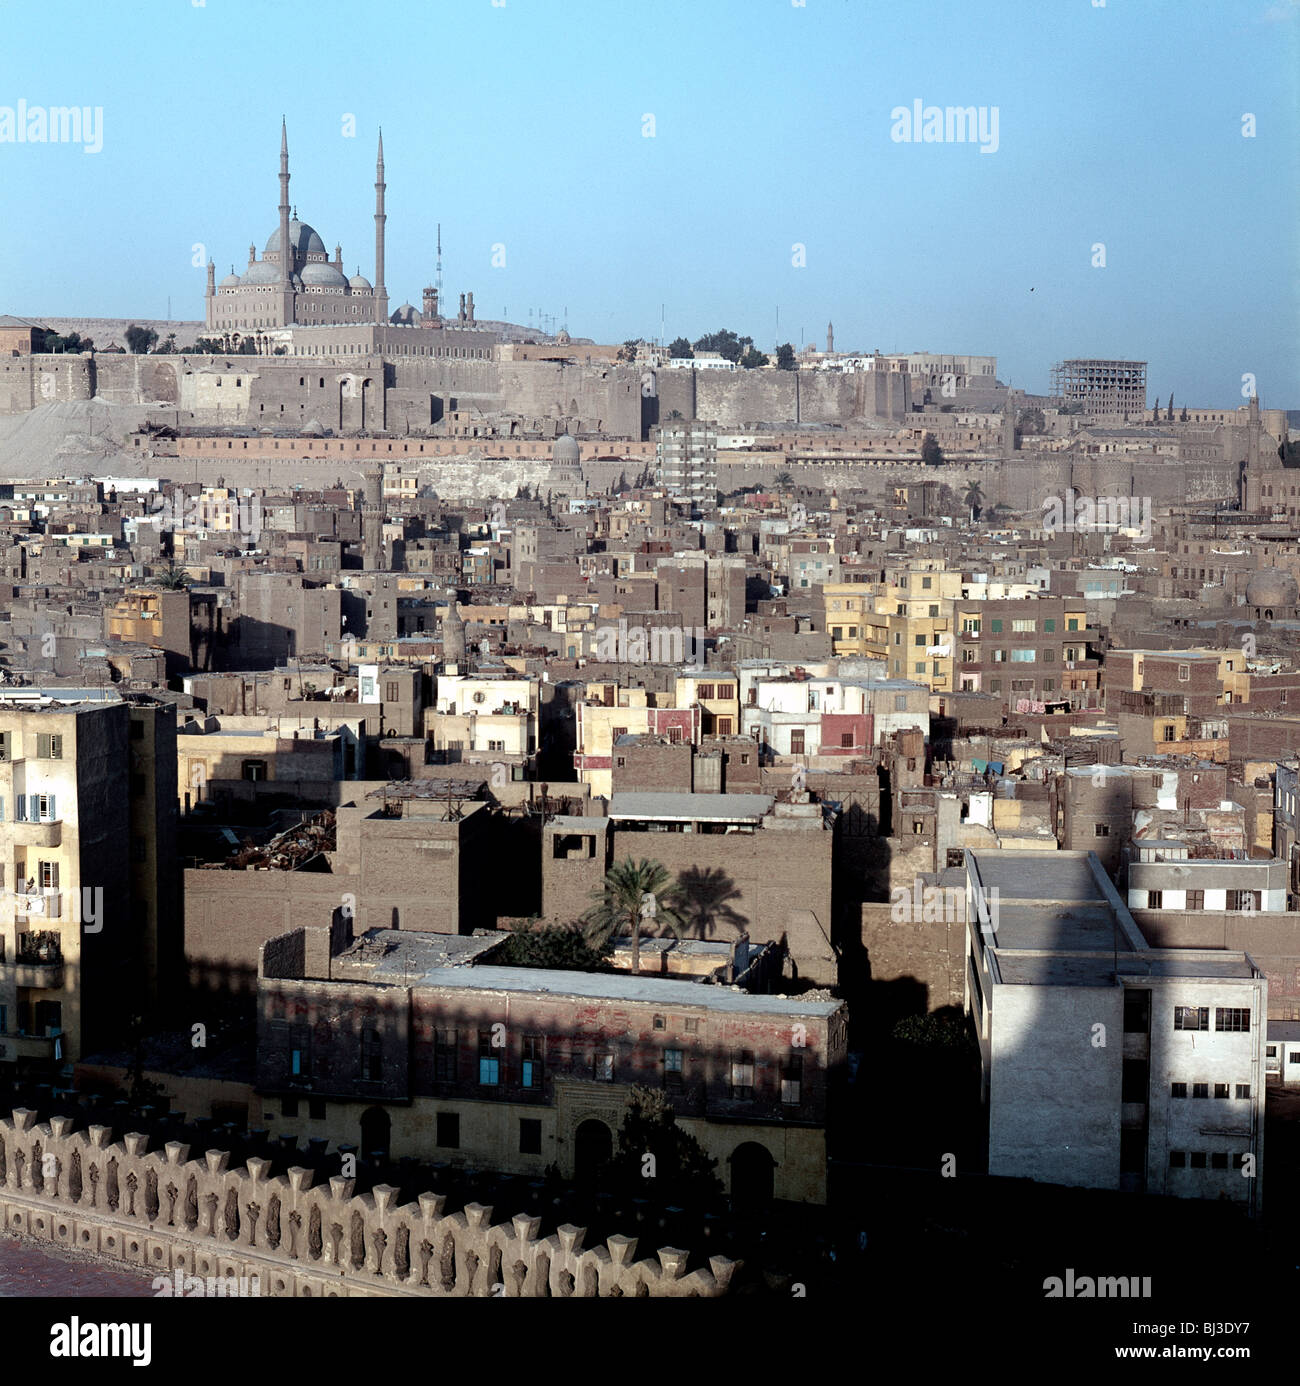 General view of the city of Cairo, Egypt. Artist: Werner Forman Stock Photo